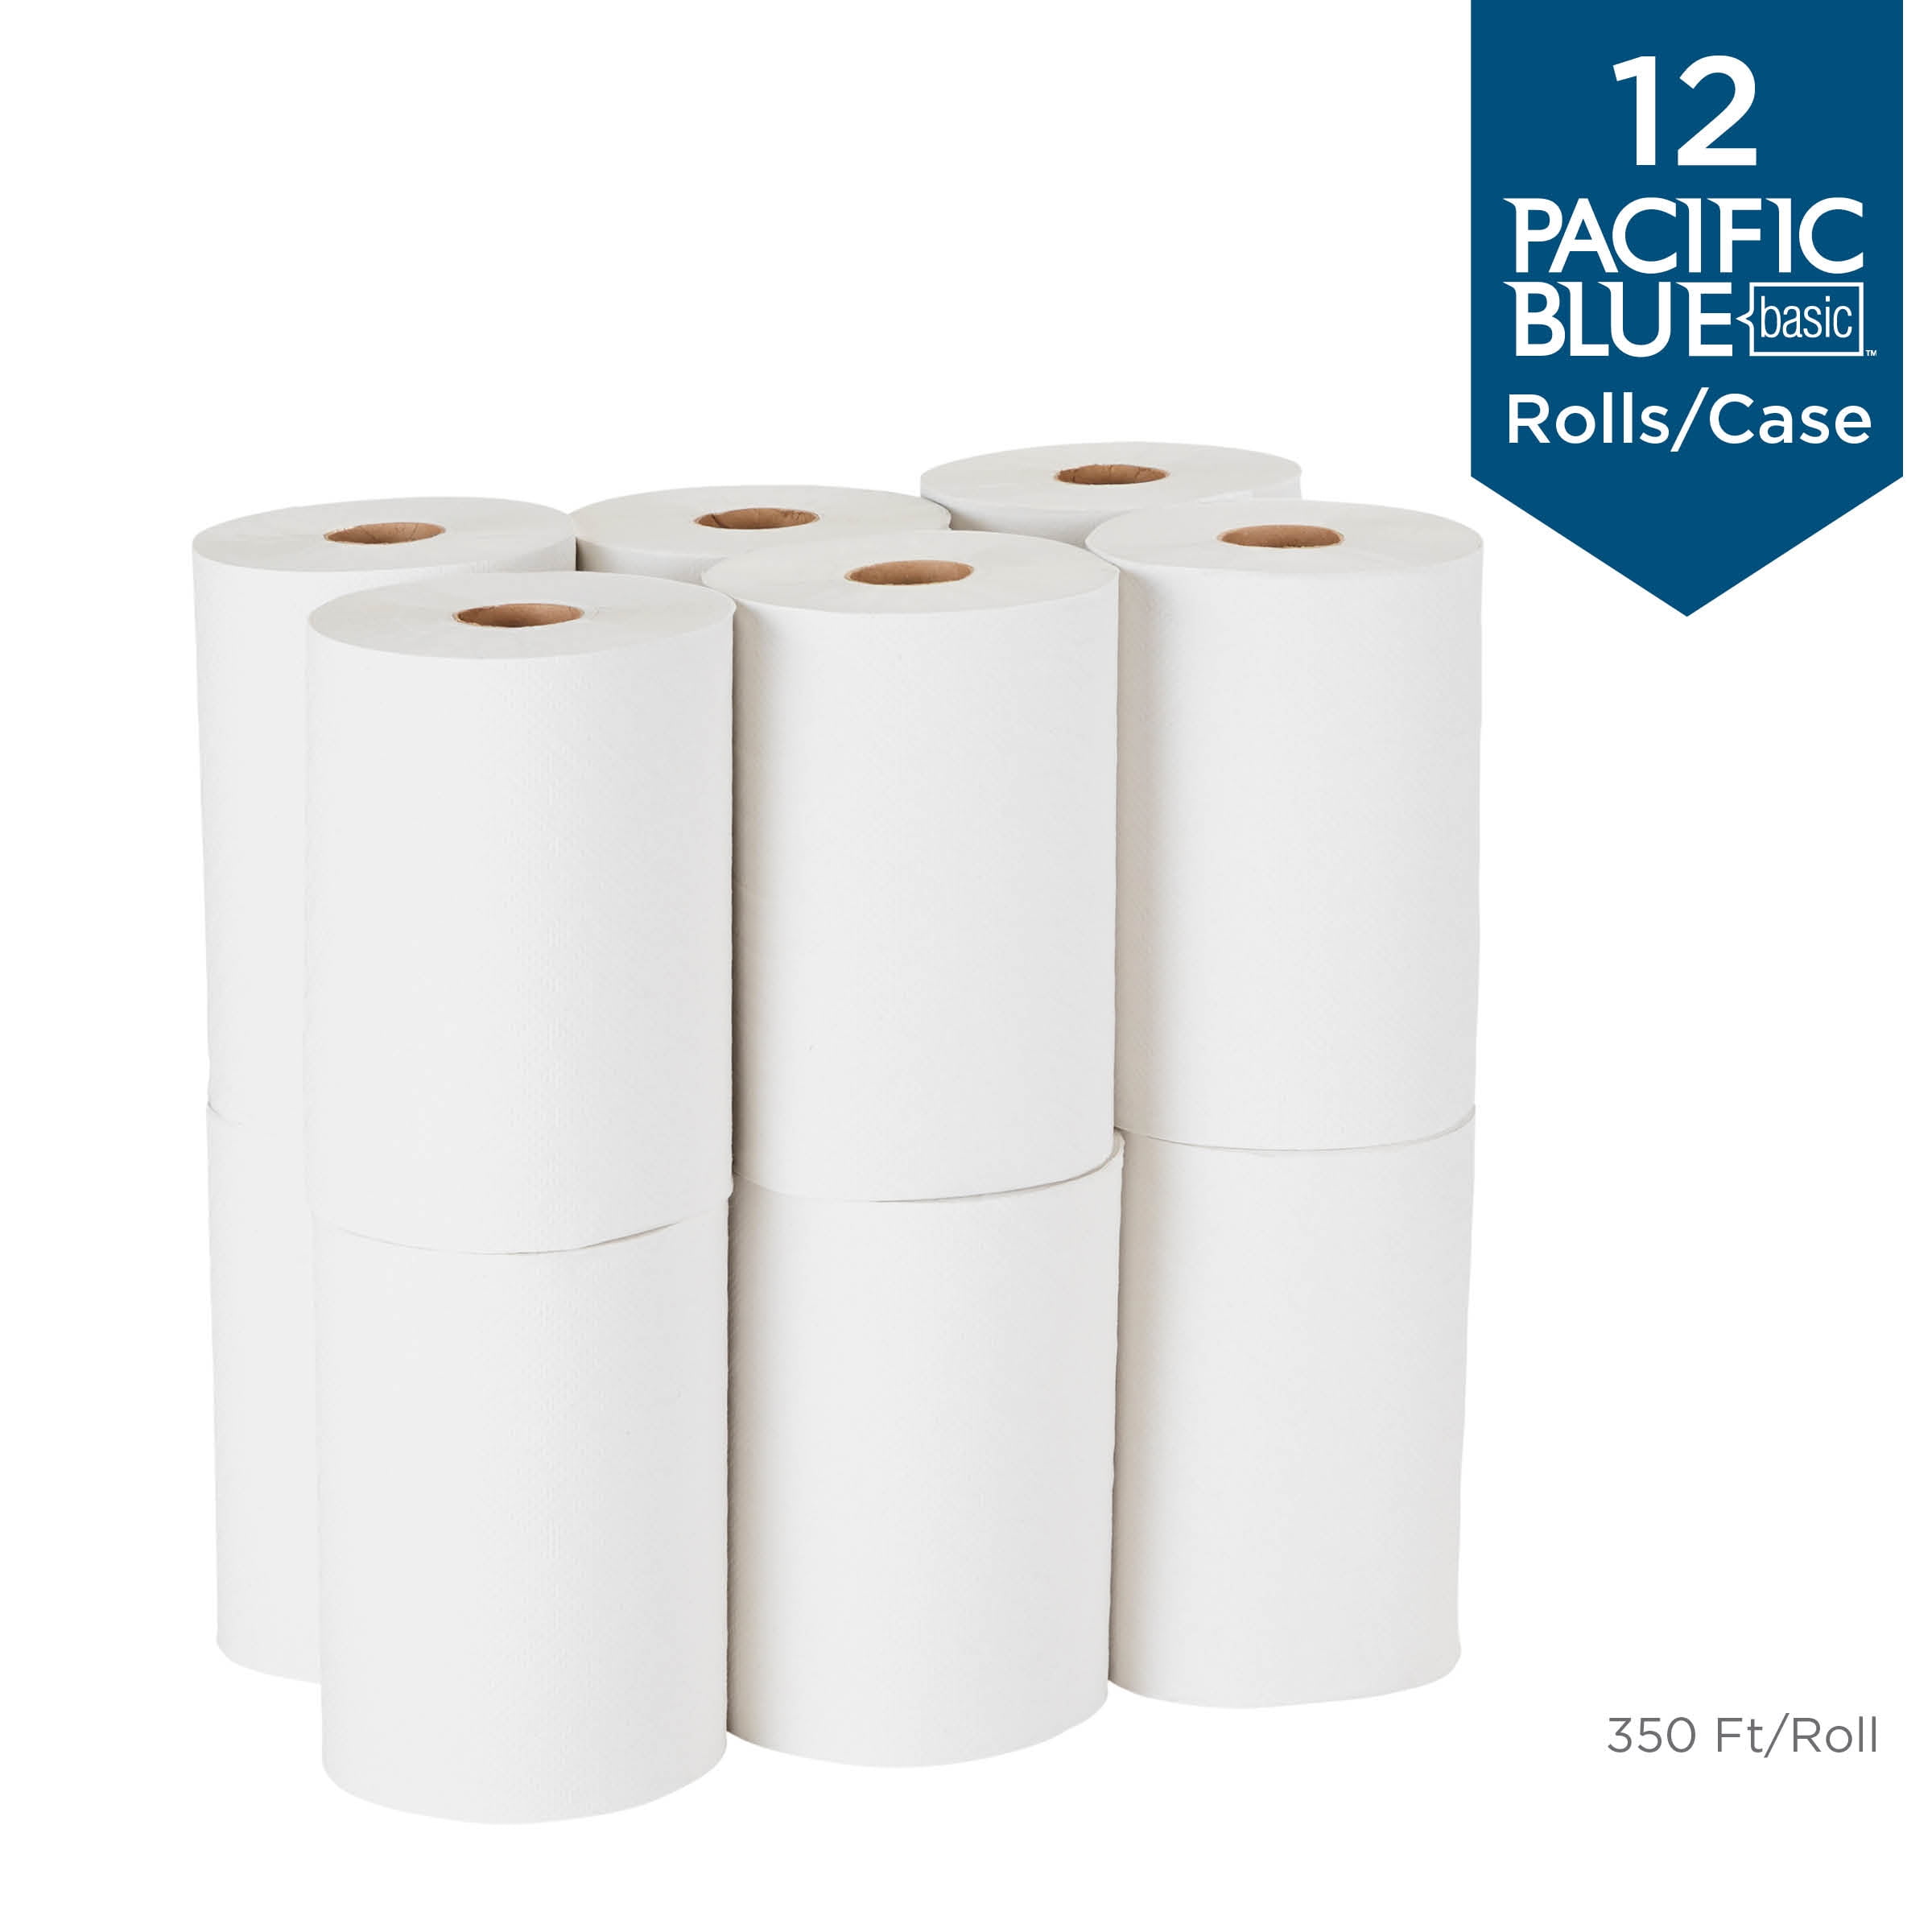 1 Individual Roll of 1000 Poly-bag Protected 7.8 x 1000 Roll 1 Individual Roll of 1000' H&PC-74969 Georgia Pacific 26480 SofPull Hardwound Paper Towels for SofPull Manual Mechanical Dispenser 7.8 x 1000' Roll Poly-bag Protected Brown